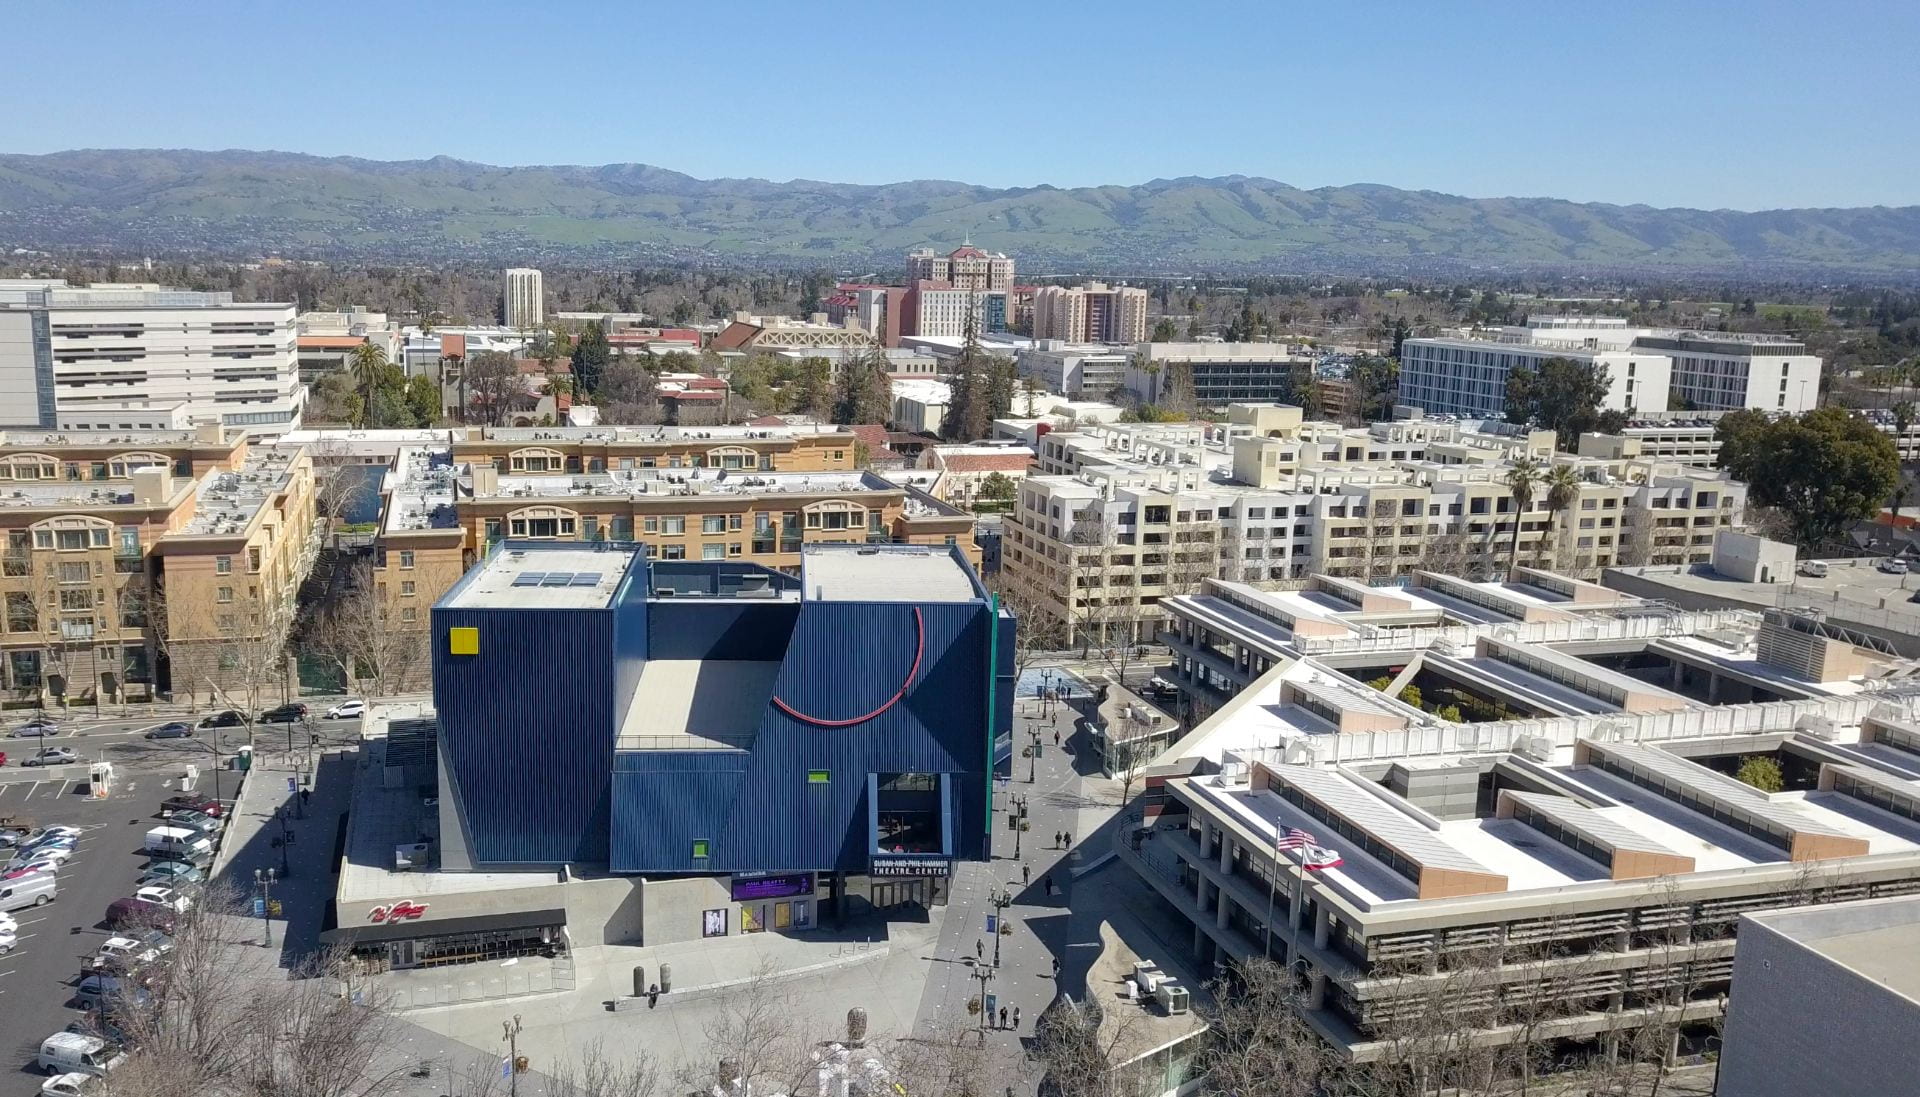 An aerial view shows the Alfred E. Alquist Building on the right across from the Hammer Theatre Center.